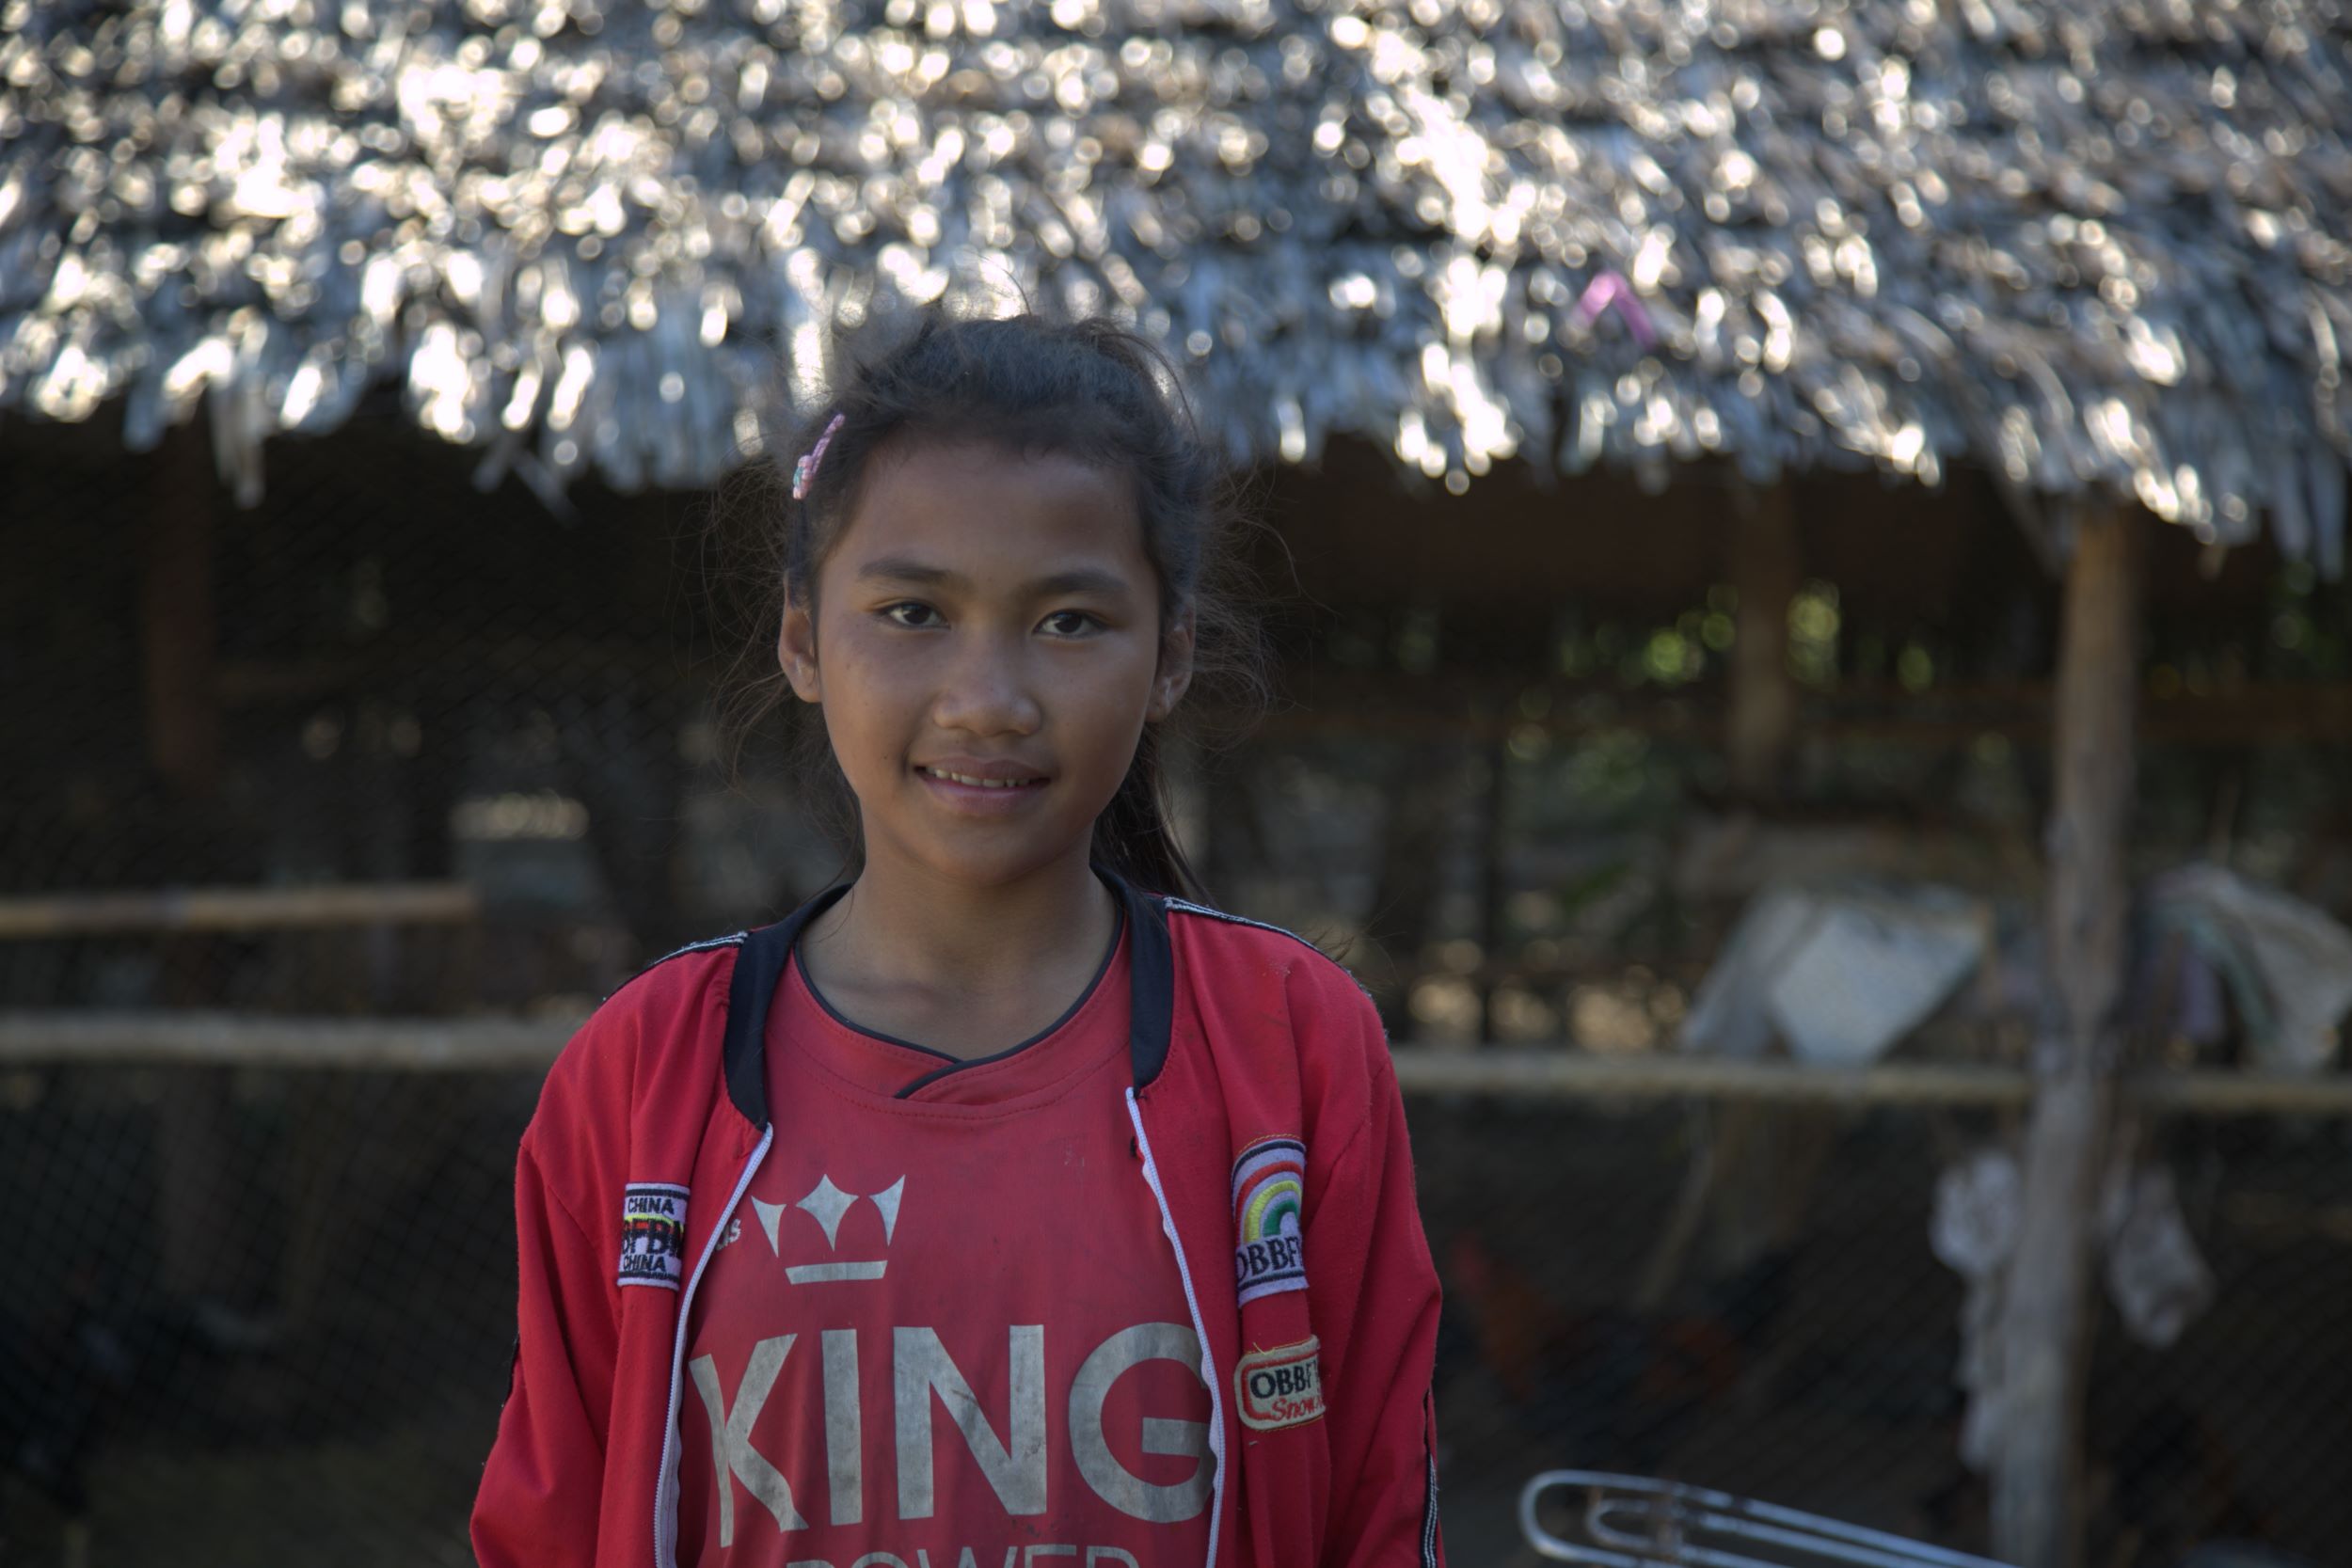 Cambodian girl, 14, smiles because now she can go back to school